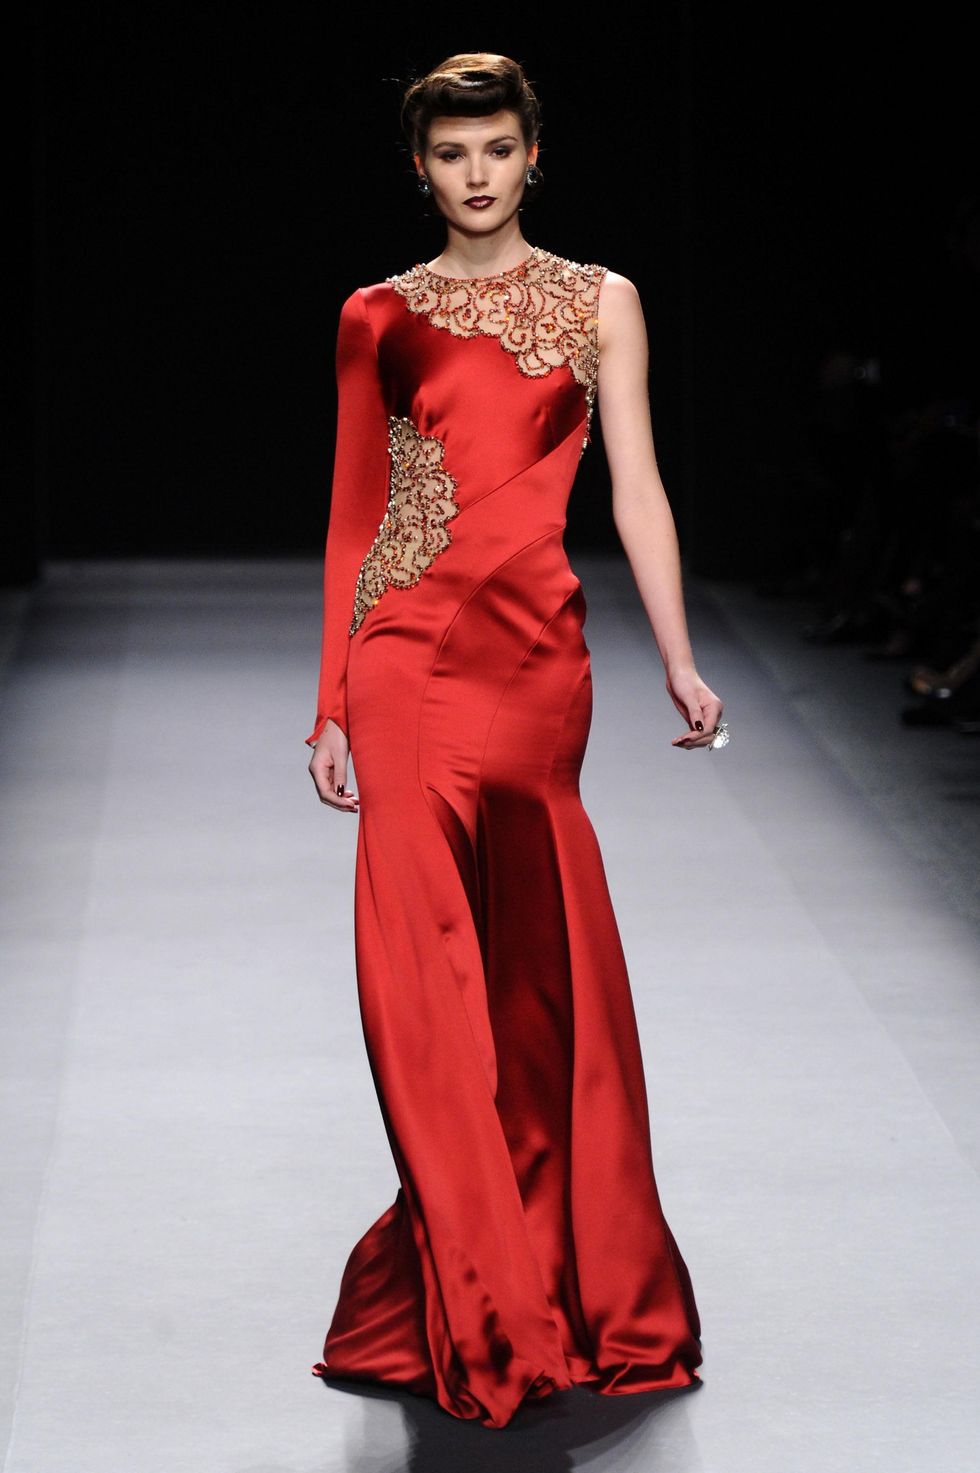 News_Jenny Packham_gown_fall 2012 collection_Feb 2012